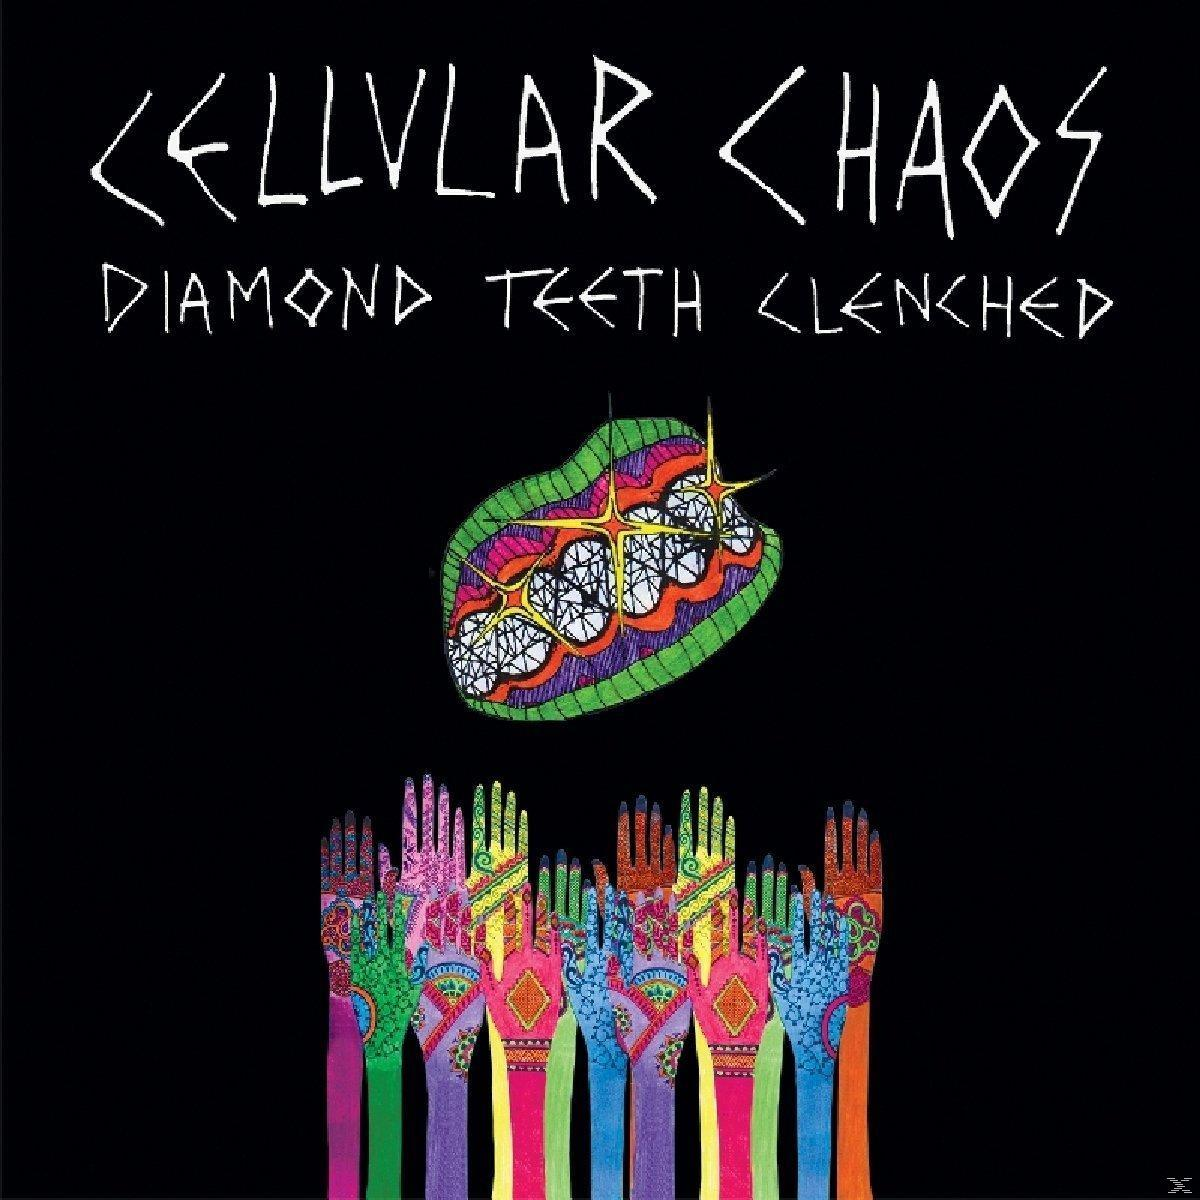 Cellular Chaos Clenched Teeth - (CD) - Diamond